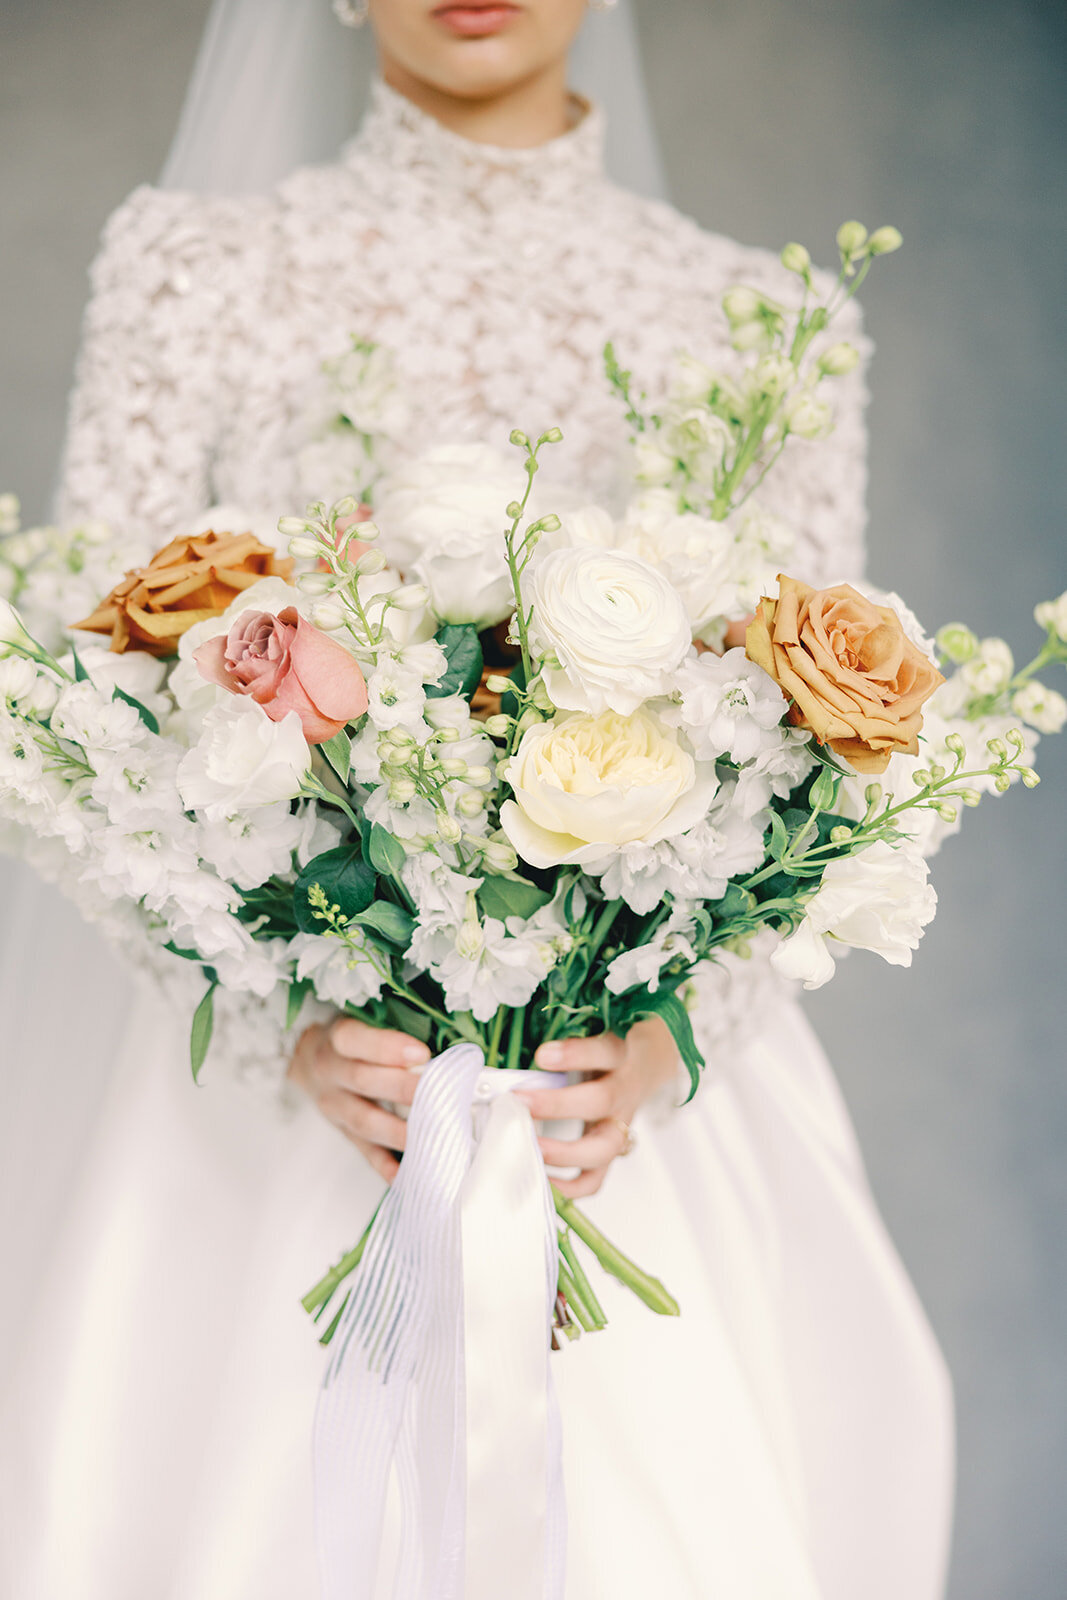 Close-up of a bride holding a large white, pink, orange and green bouquet